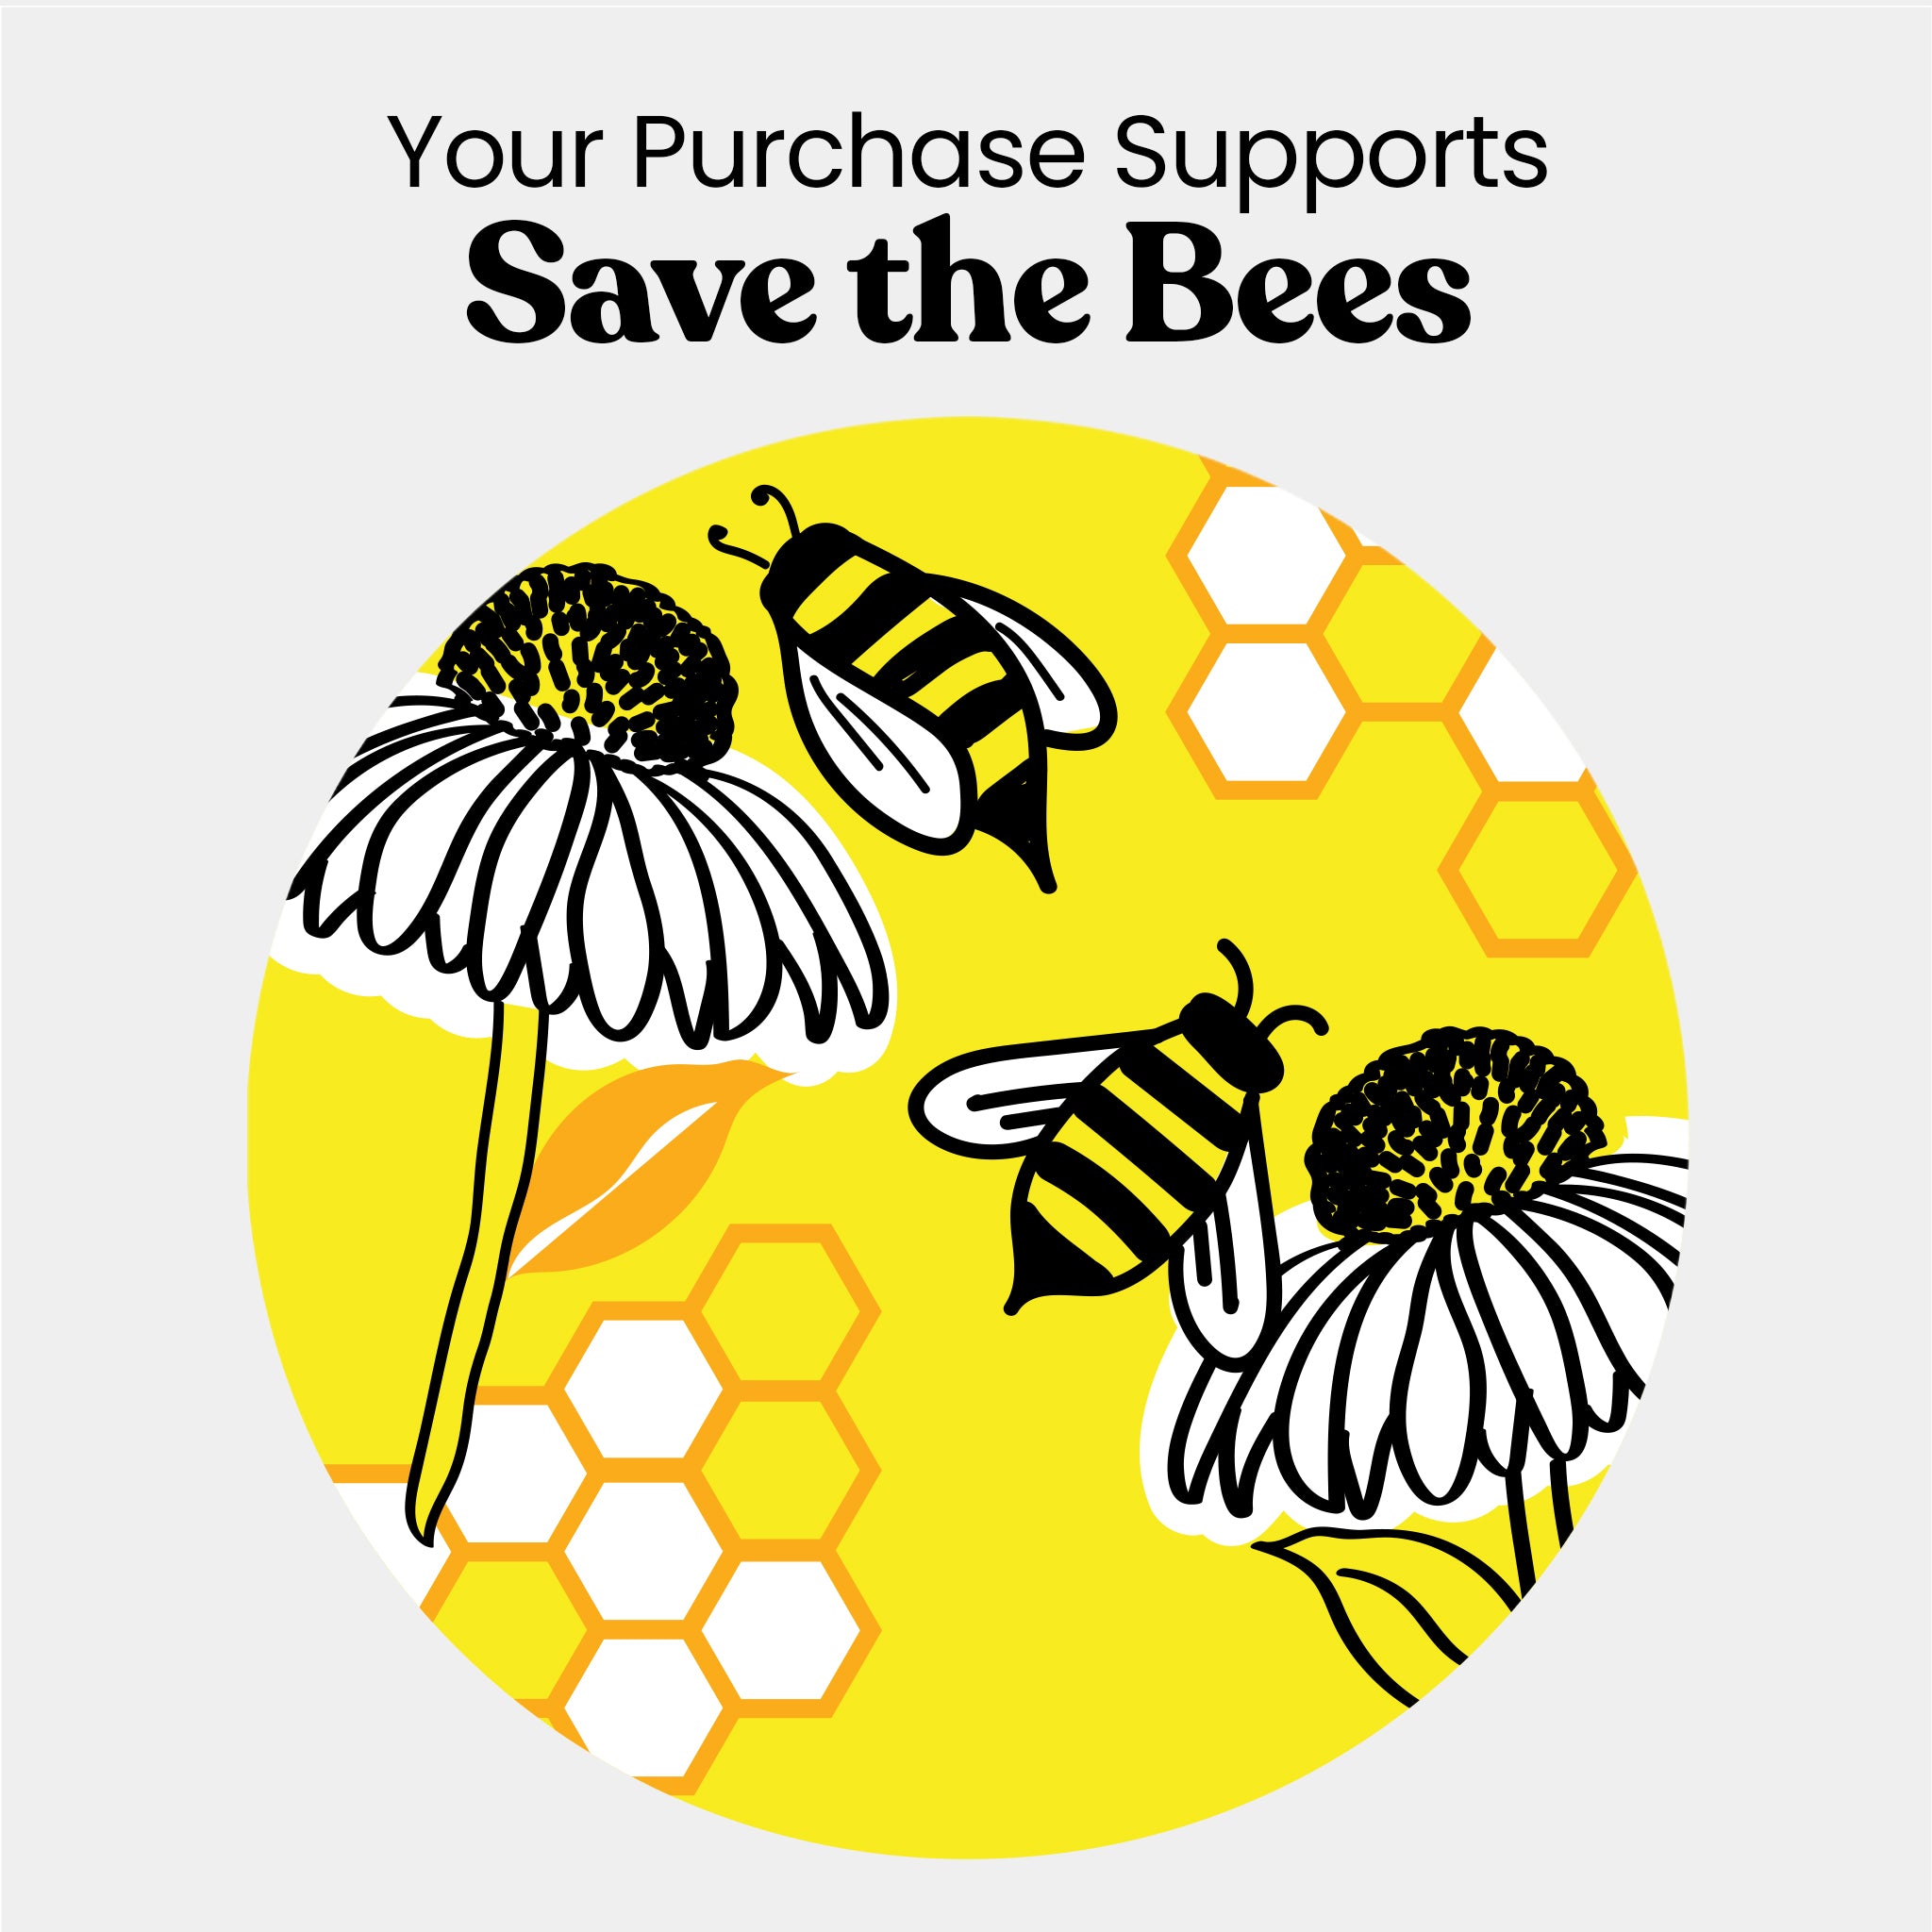 Revolve Manual Toothbrush Heads - Save the bees